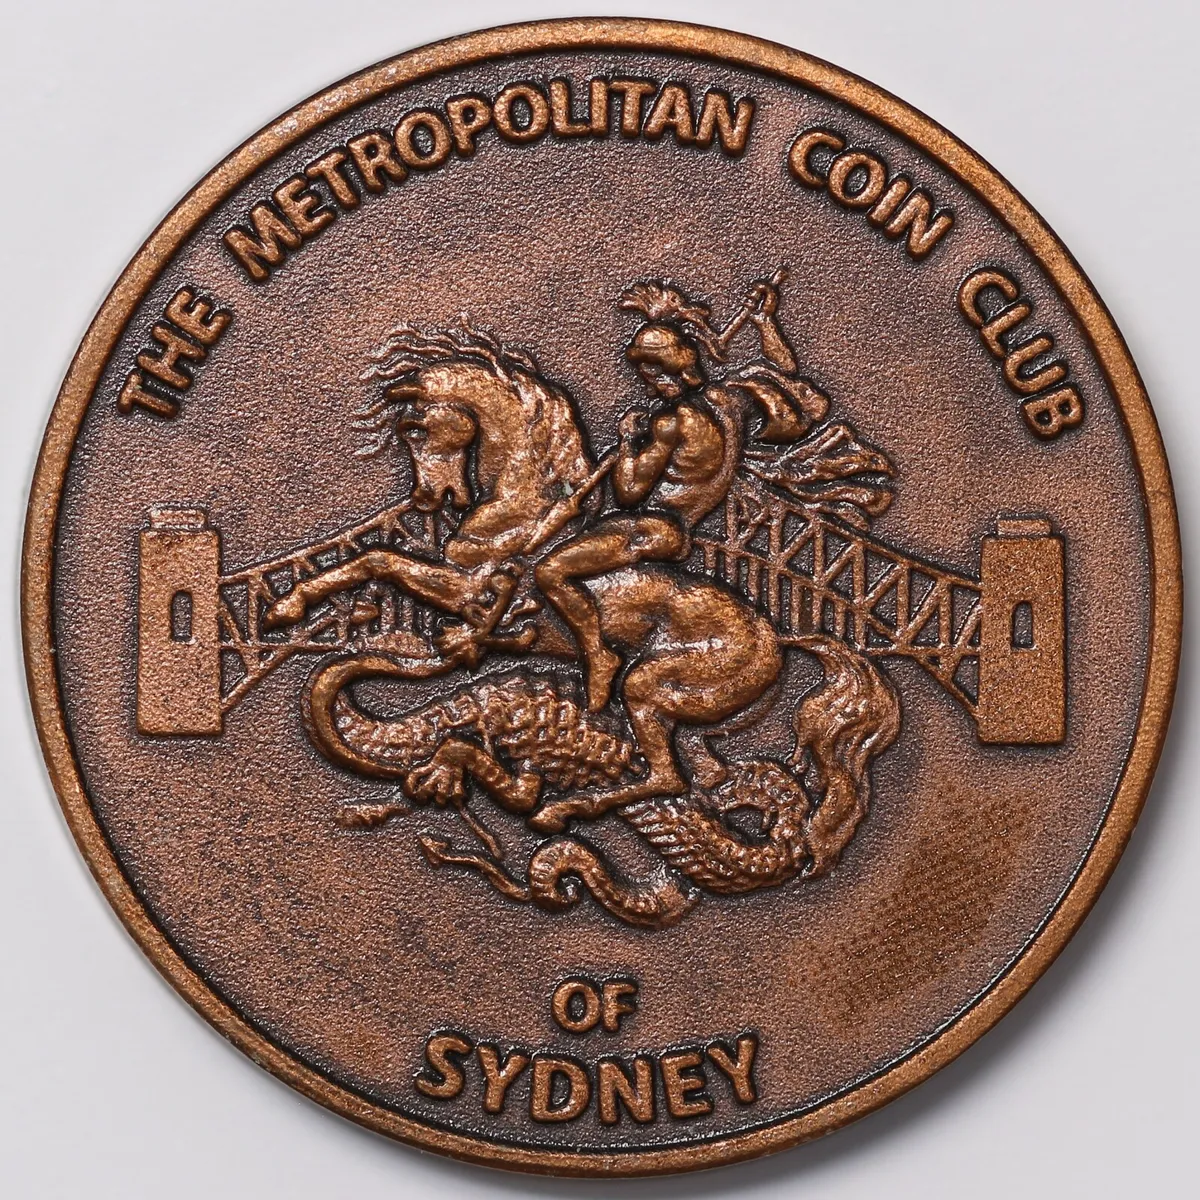 Coin news / Perth Coin Club - Catalogue | National Library of Australia